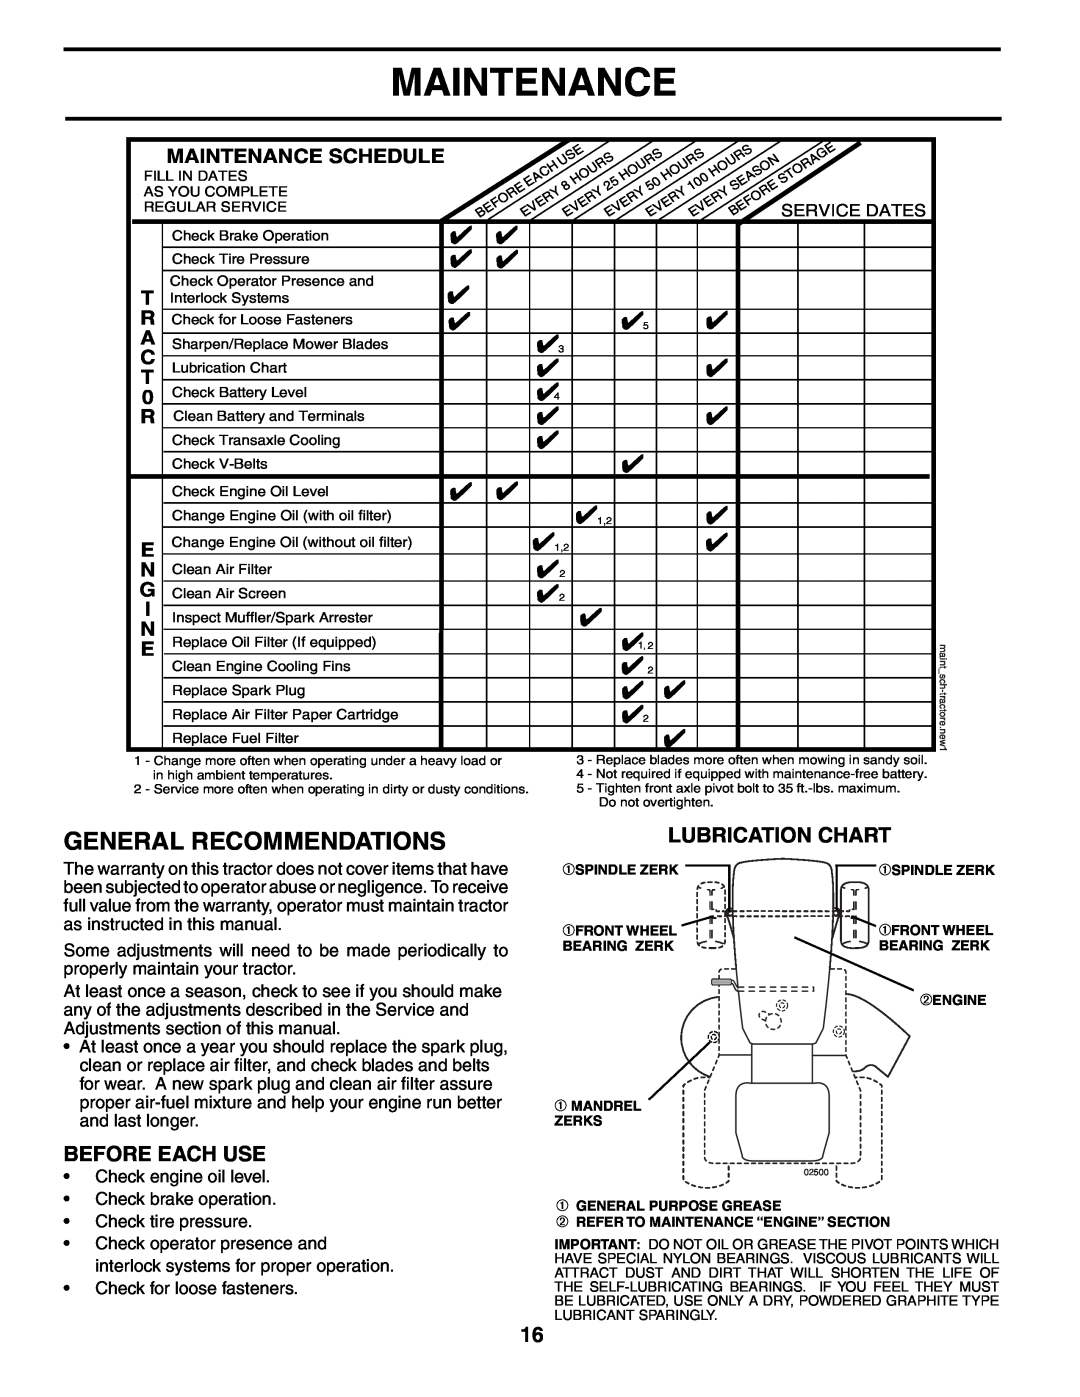 Poulan 954569516, 185498 owner manual General Recommendations, Lubrication Chart, Before Each Use, Maintenance Schedule 